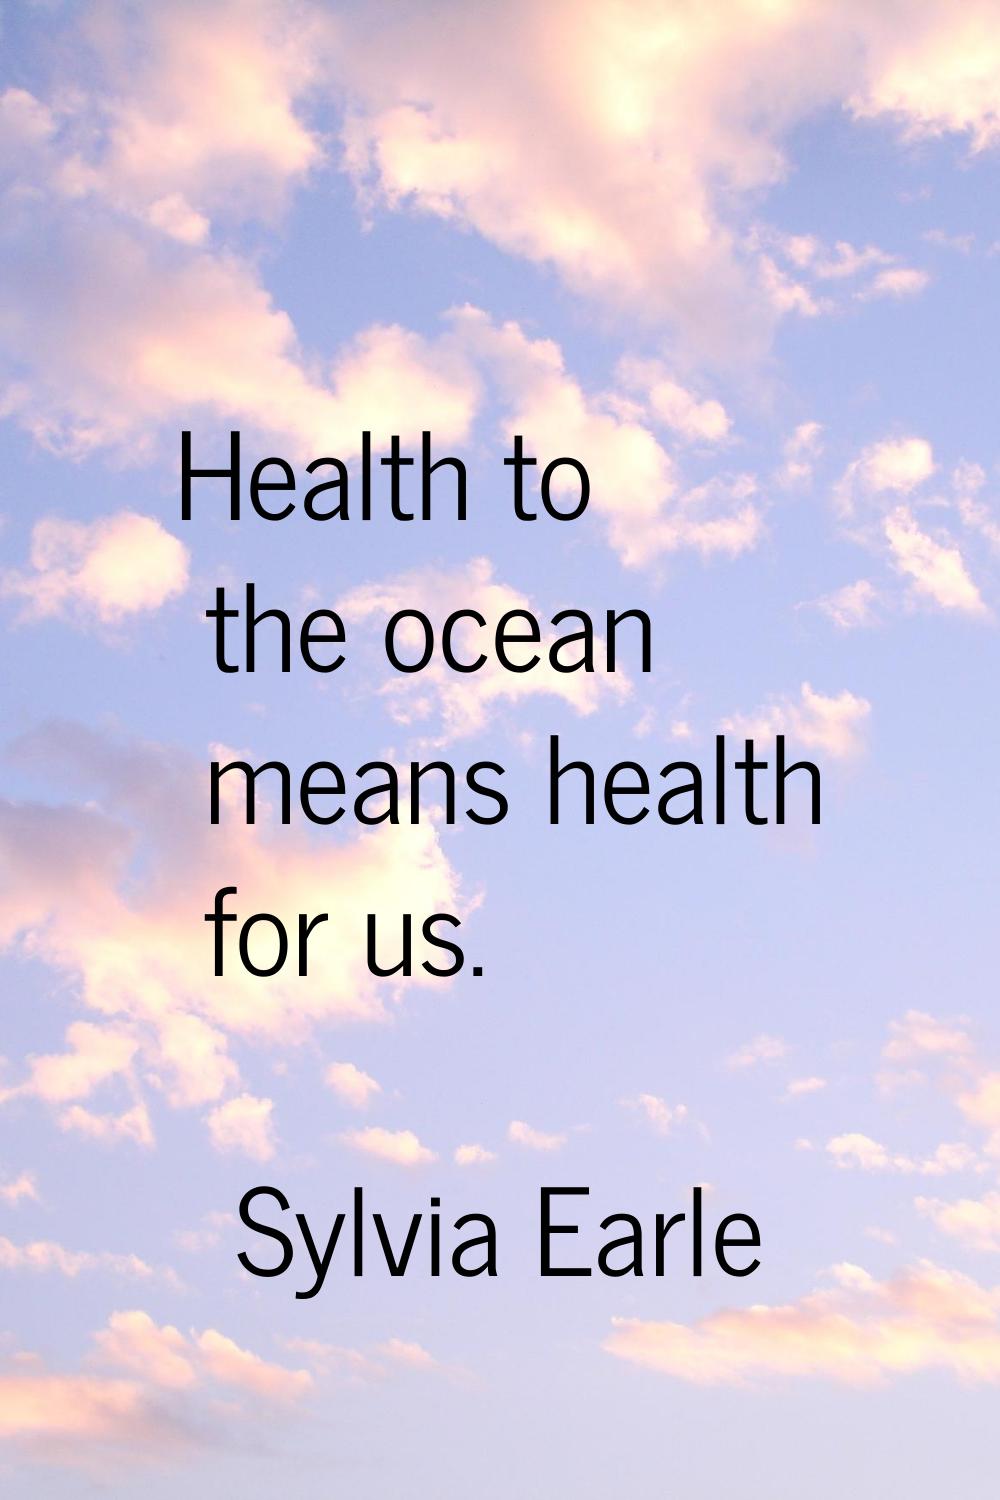 Health to the ocean means health for us.